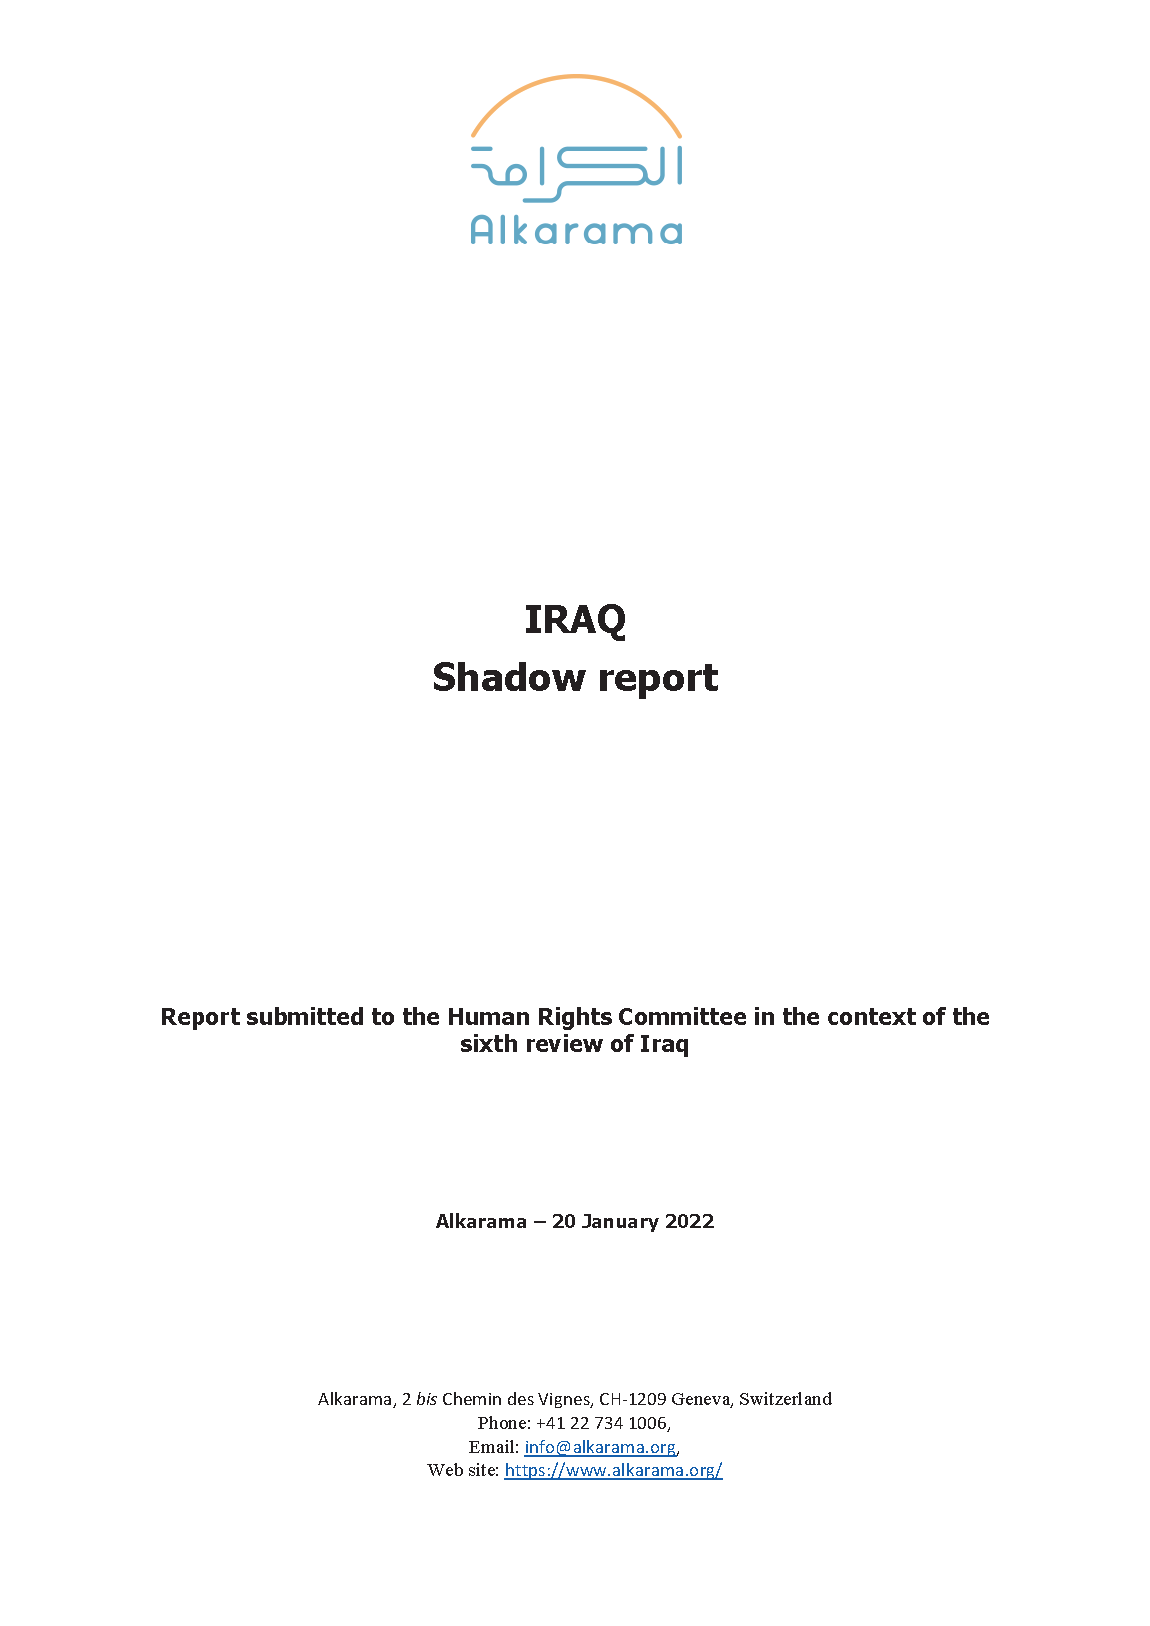 IRAQ: Human Rights Committee - 6th Review - Alkarama's report - January 2022